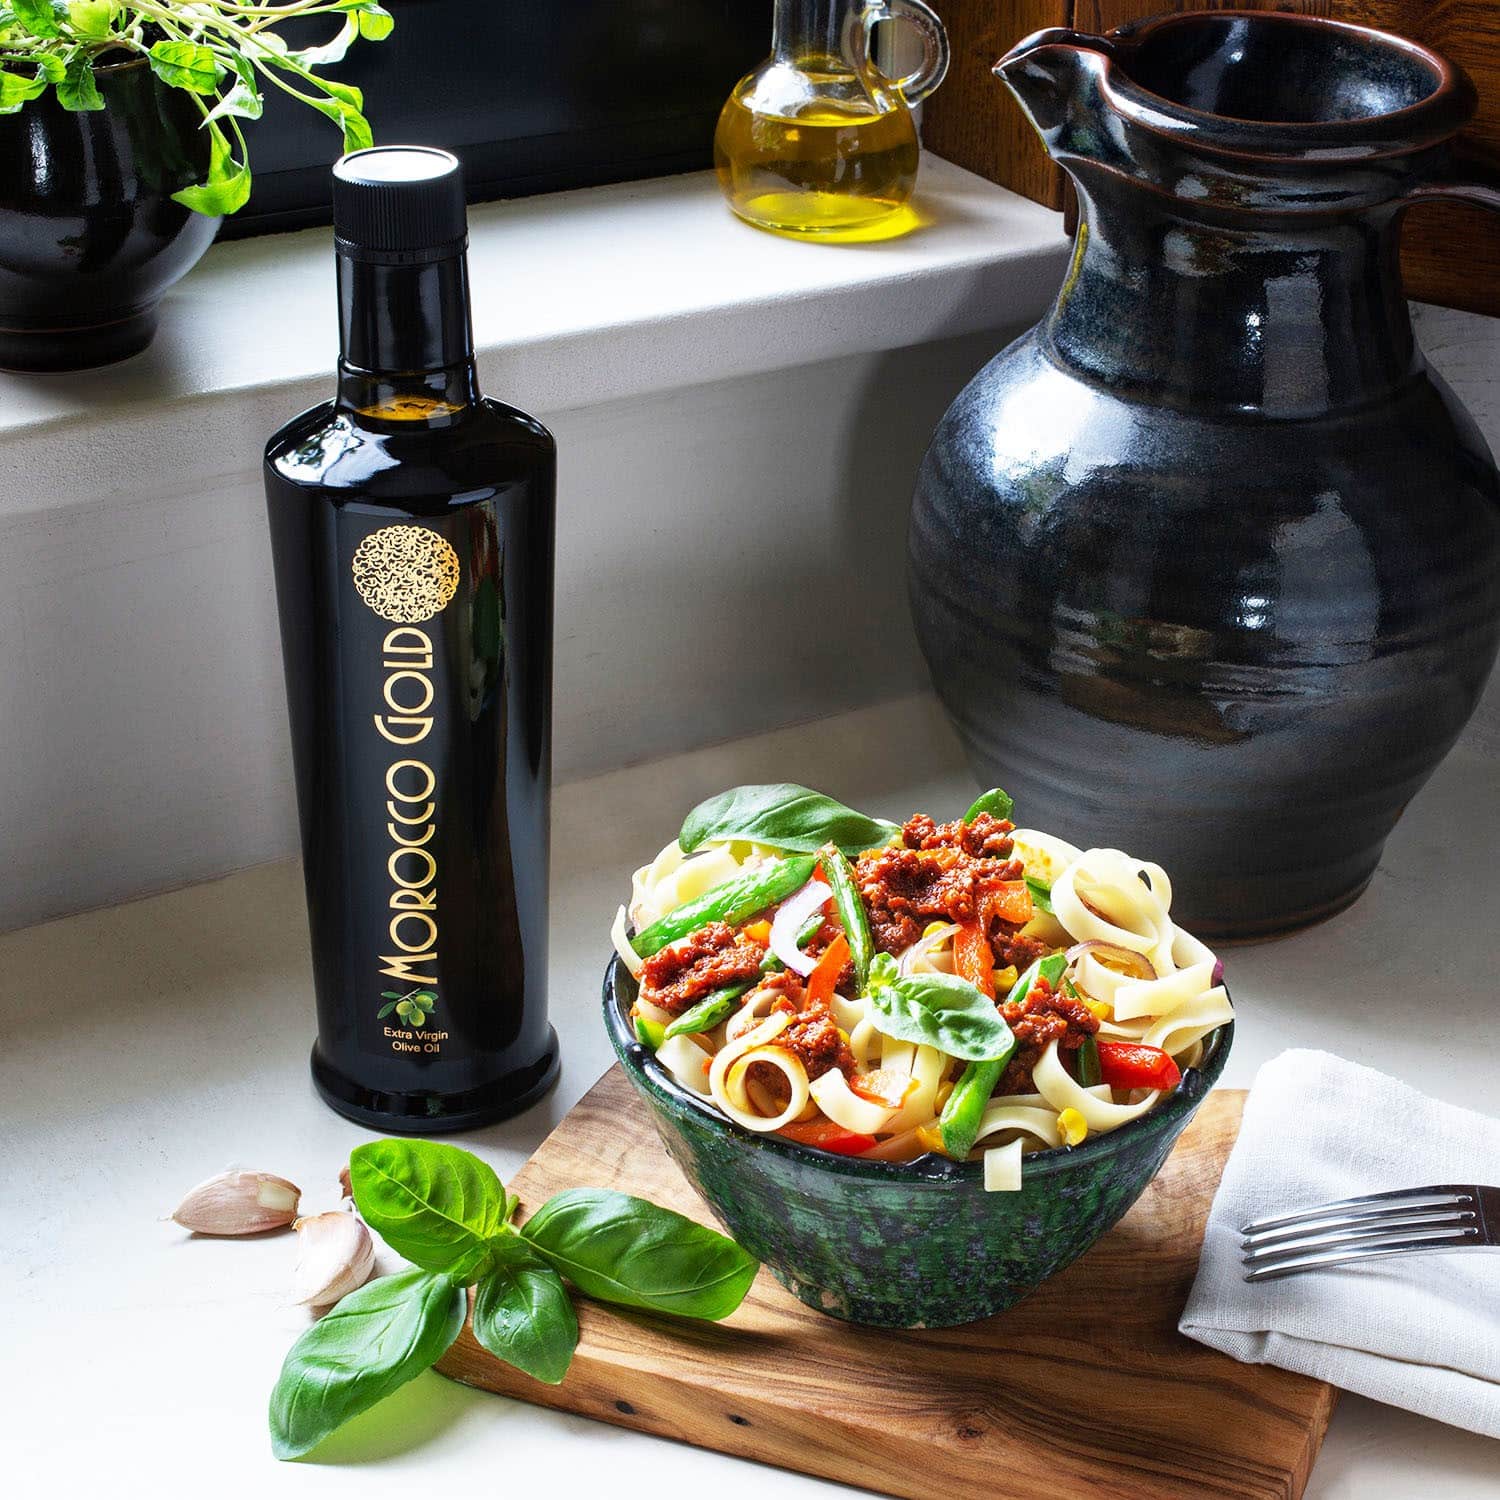 Distributors EnJoy The Benefit Of A Quality Extra Virgin Olive Oil